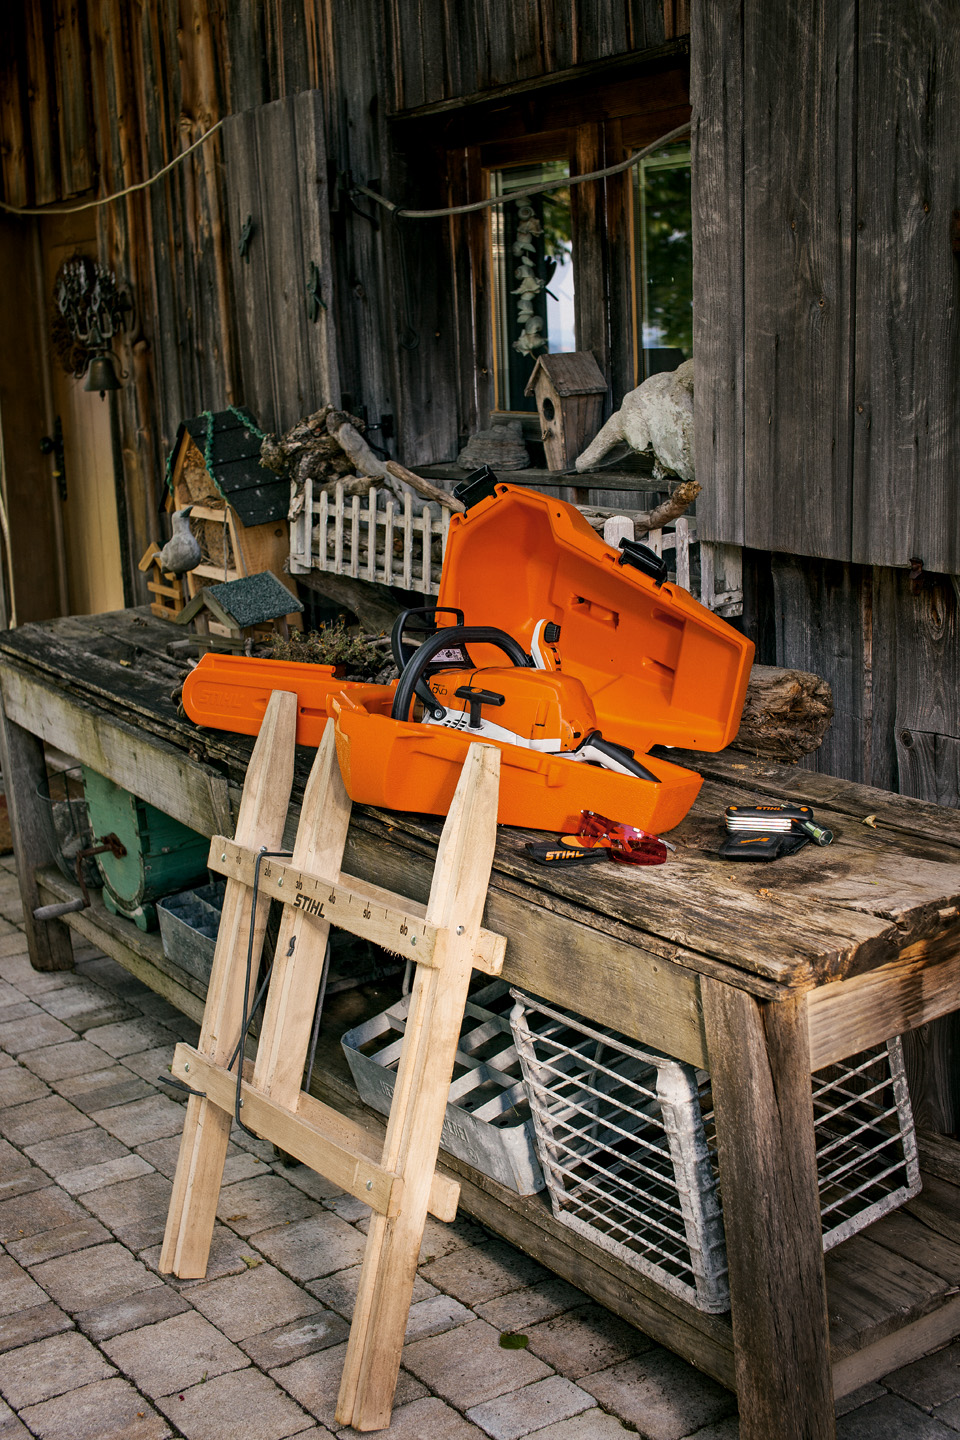 A STIHL chainsaw in a plastic storage case on a wooden workbench